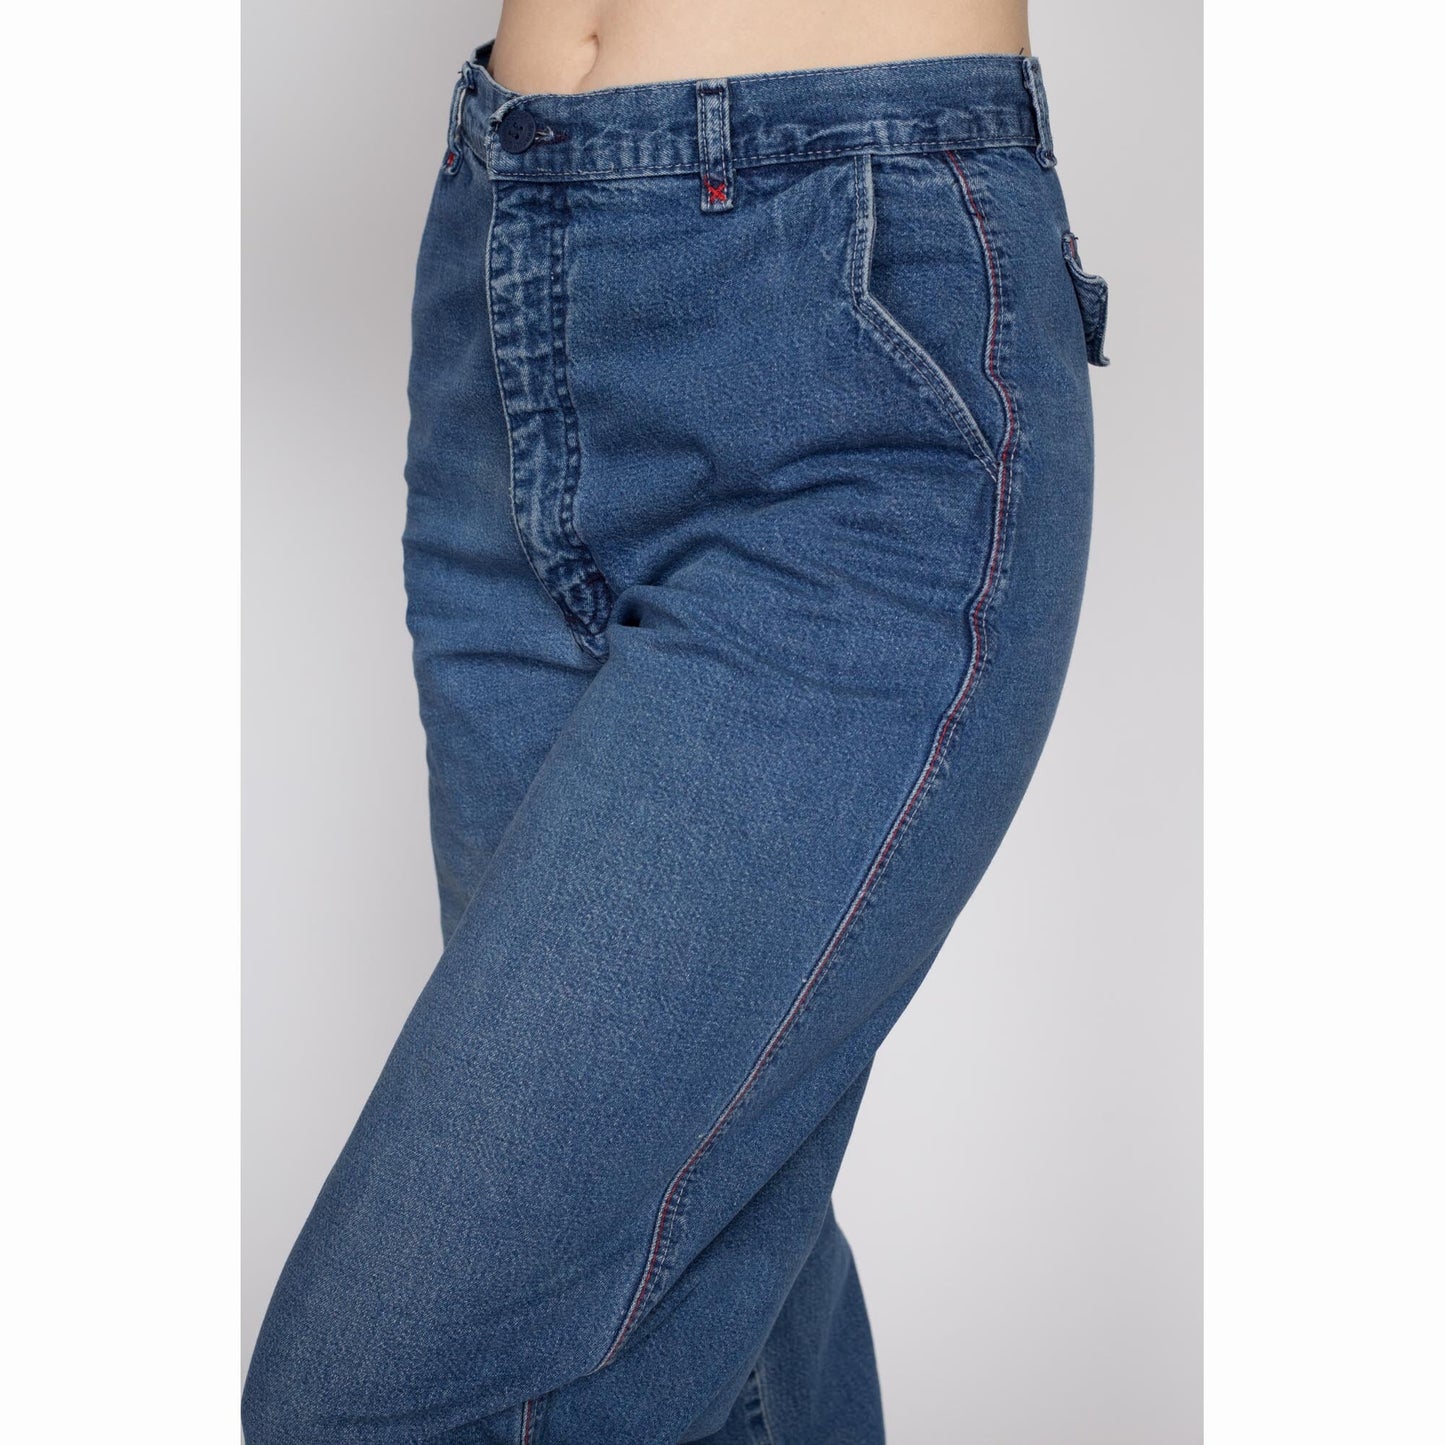 Medium 80s Rocky Mountain High Waisted Jeans 29" Tall | Vintage Medium Wash Long Inseam Mom Jeans